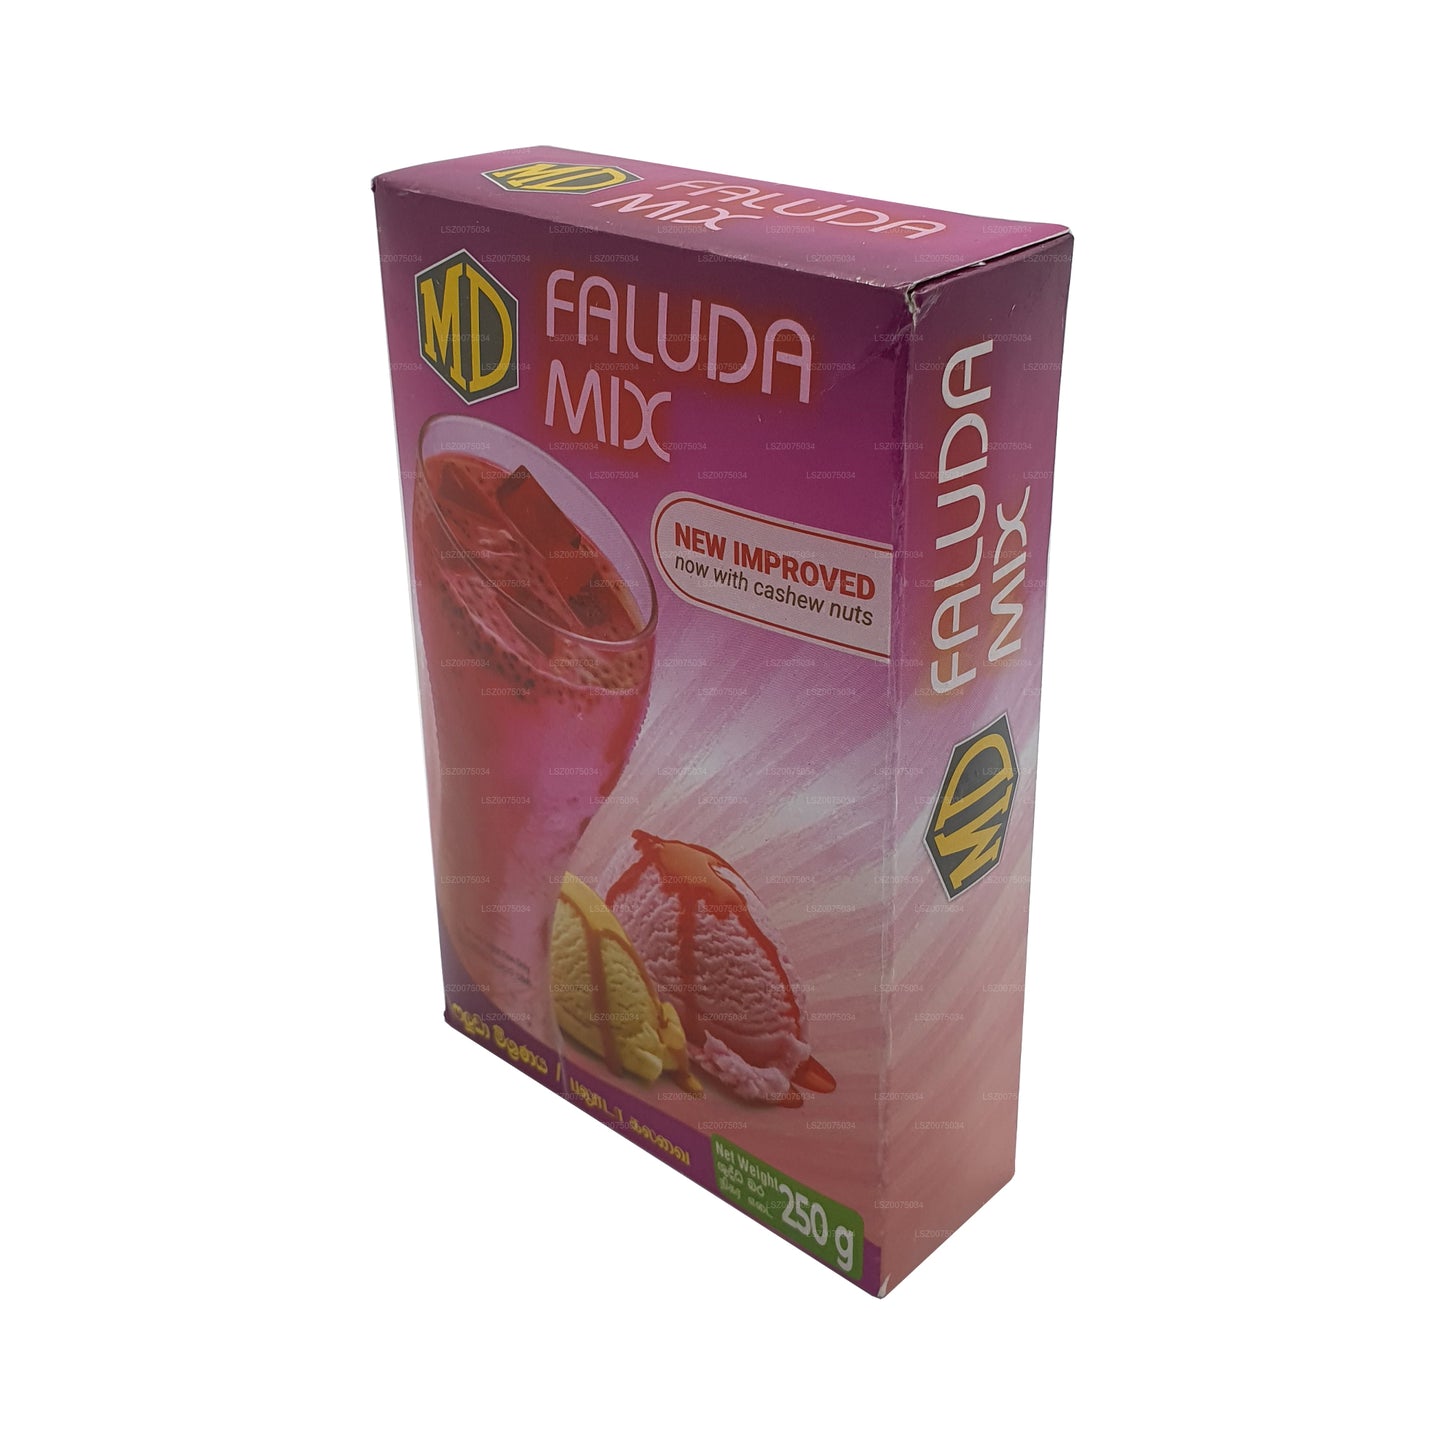 MD Instant Faluda Mix (250g)